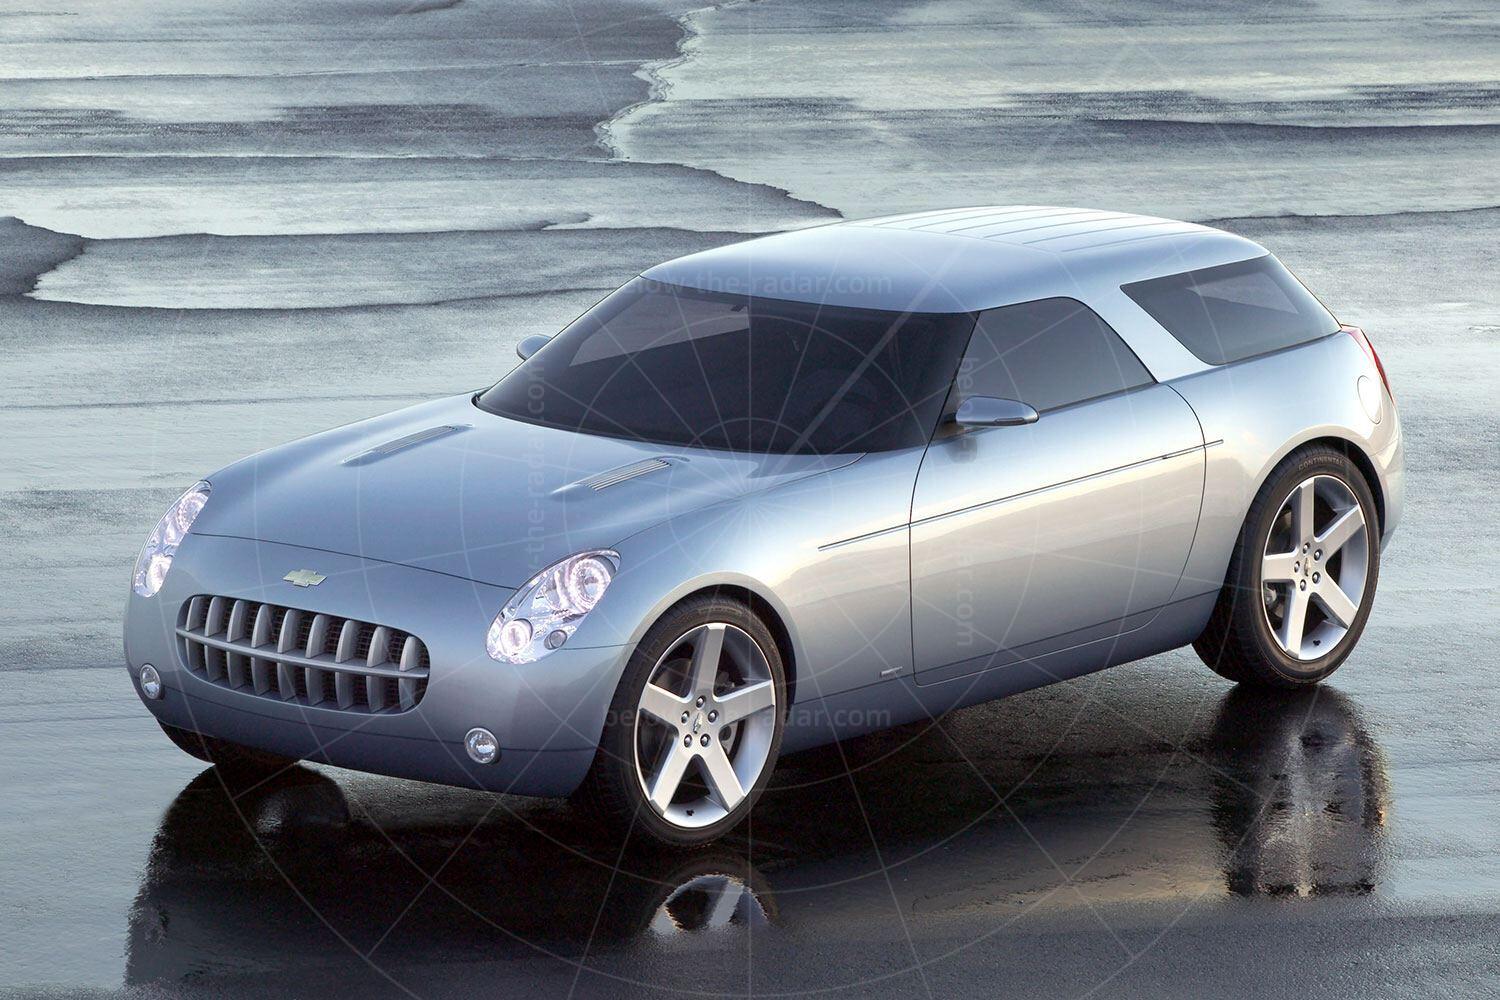 The 2004 Chevrolet Nomad concept Pic: GM | The 2004 Chevrolet Nomad concept